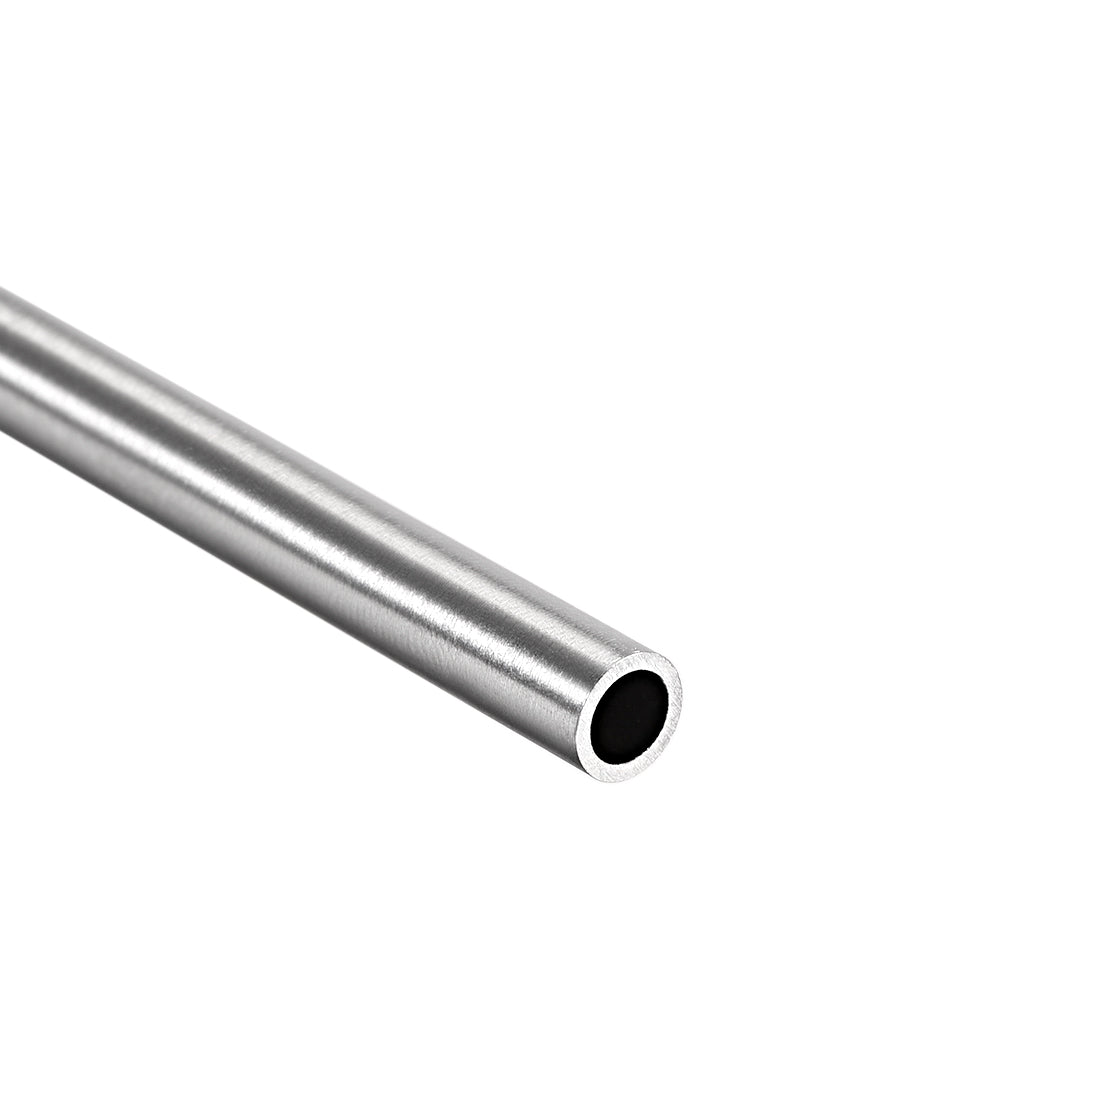 uxcell Uxcell 304 Stainless Steel Round Tubing 6mm OD 0.8mm Wall Thickness 250mm Length Seamless Straight Pipe Tube 4 Pcs